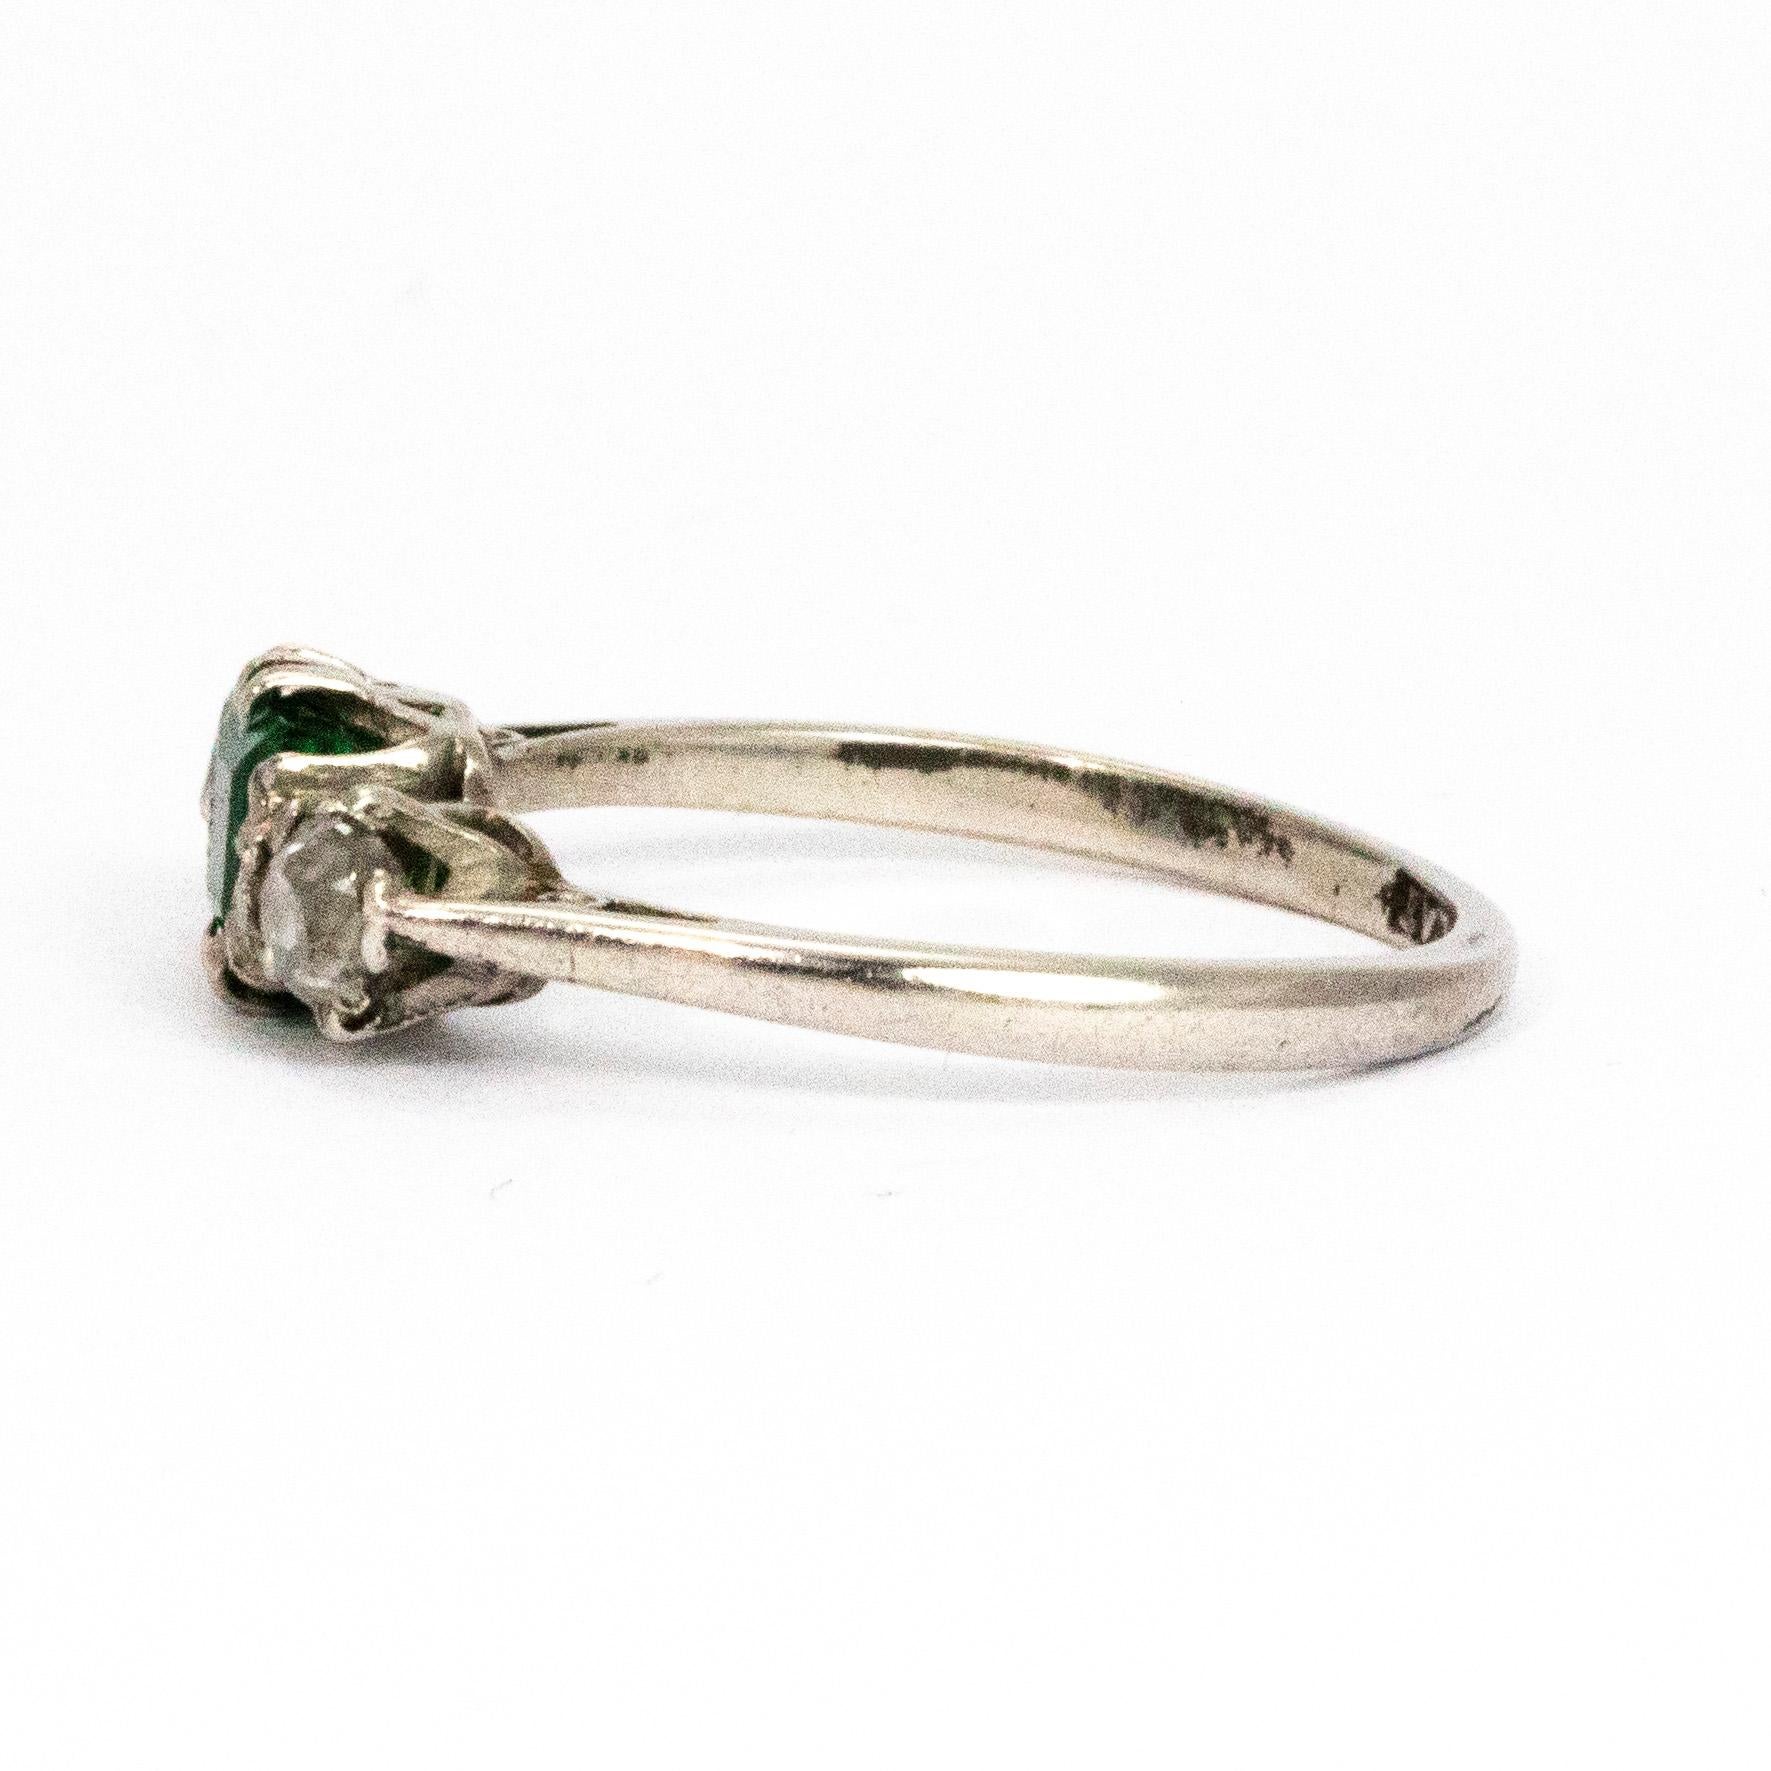 The emerald in the centre of this trio of stunning stones measures 50pts and the shimmering round cut diamonds that sit either side measure 20pts each. All modelled in platinum.

Ring Size: M or 6 1/4